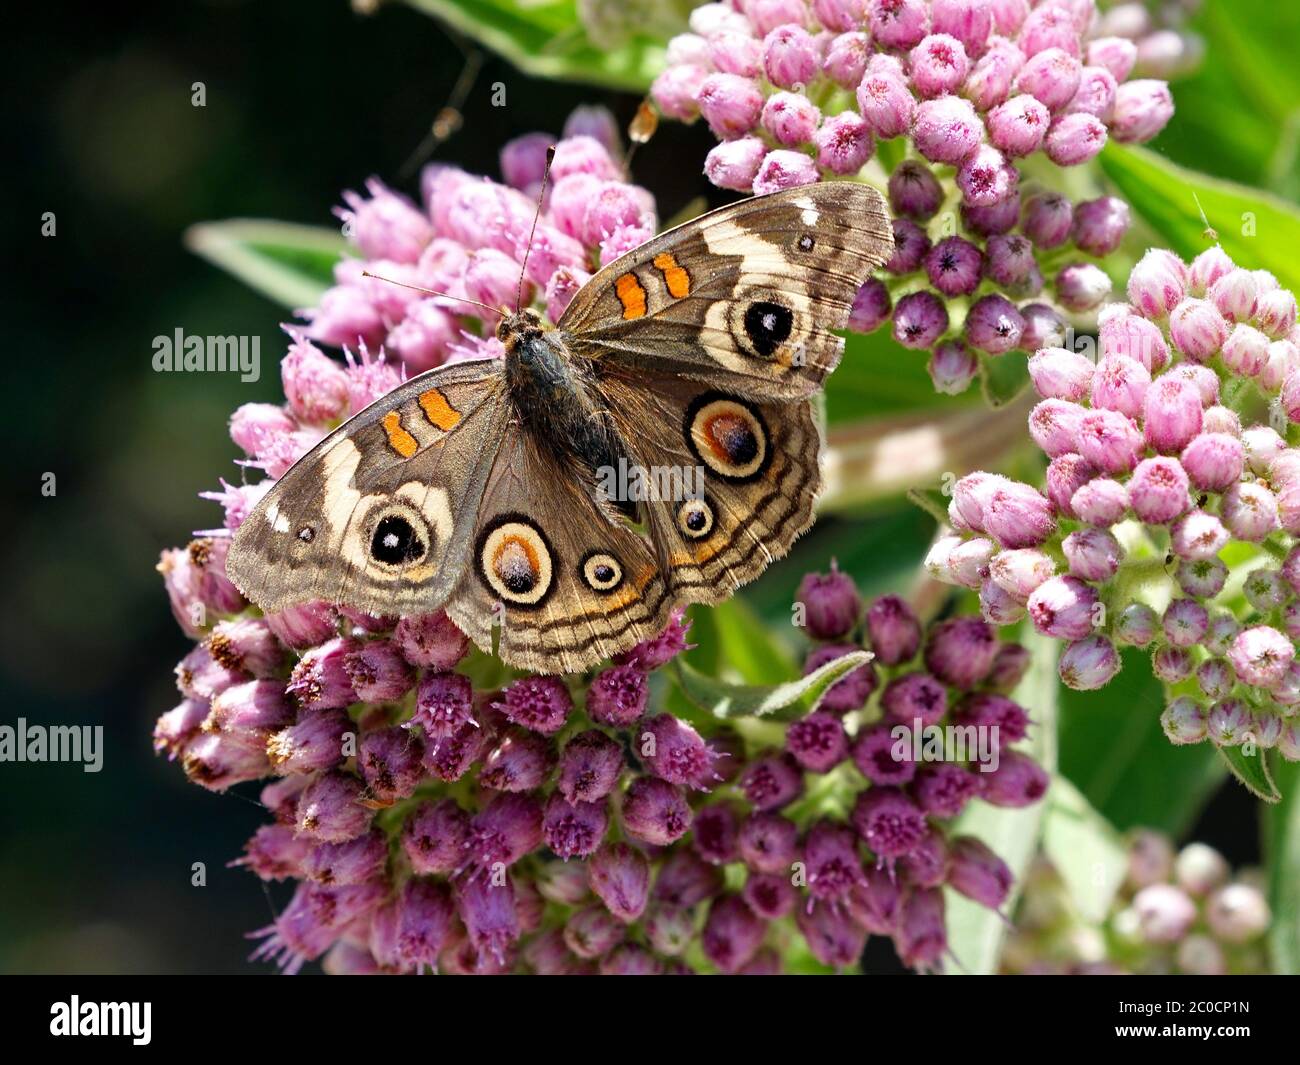 A Common Buckeye Butterfly resting on flowers. Stock Photo